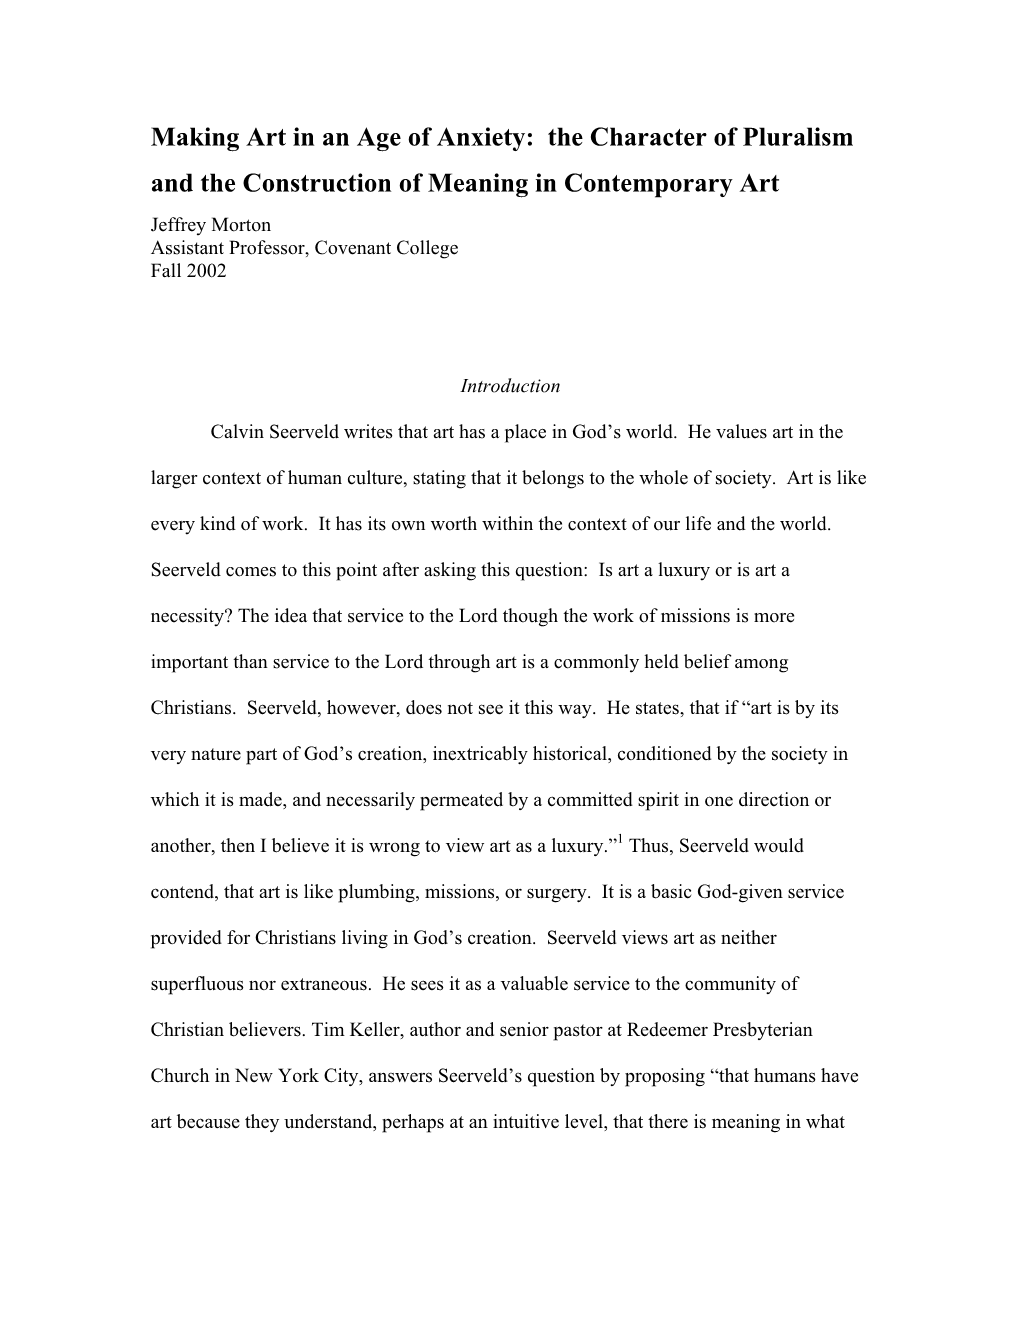 Making Art in an Age of Anxiety: the Character of Pluralism and the Construction of Meaning in Contemporary